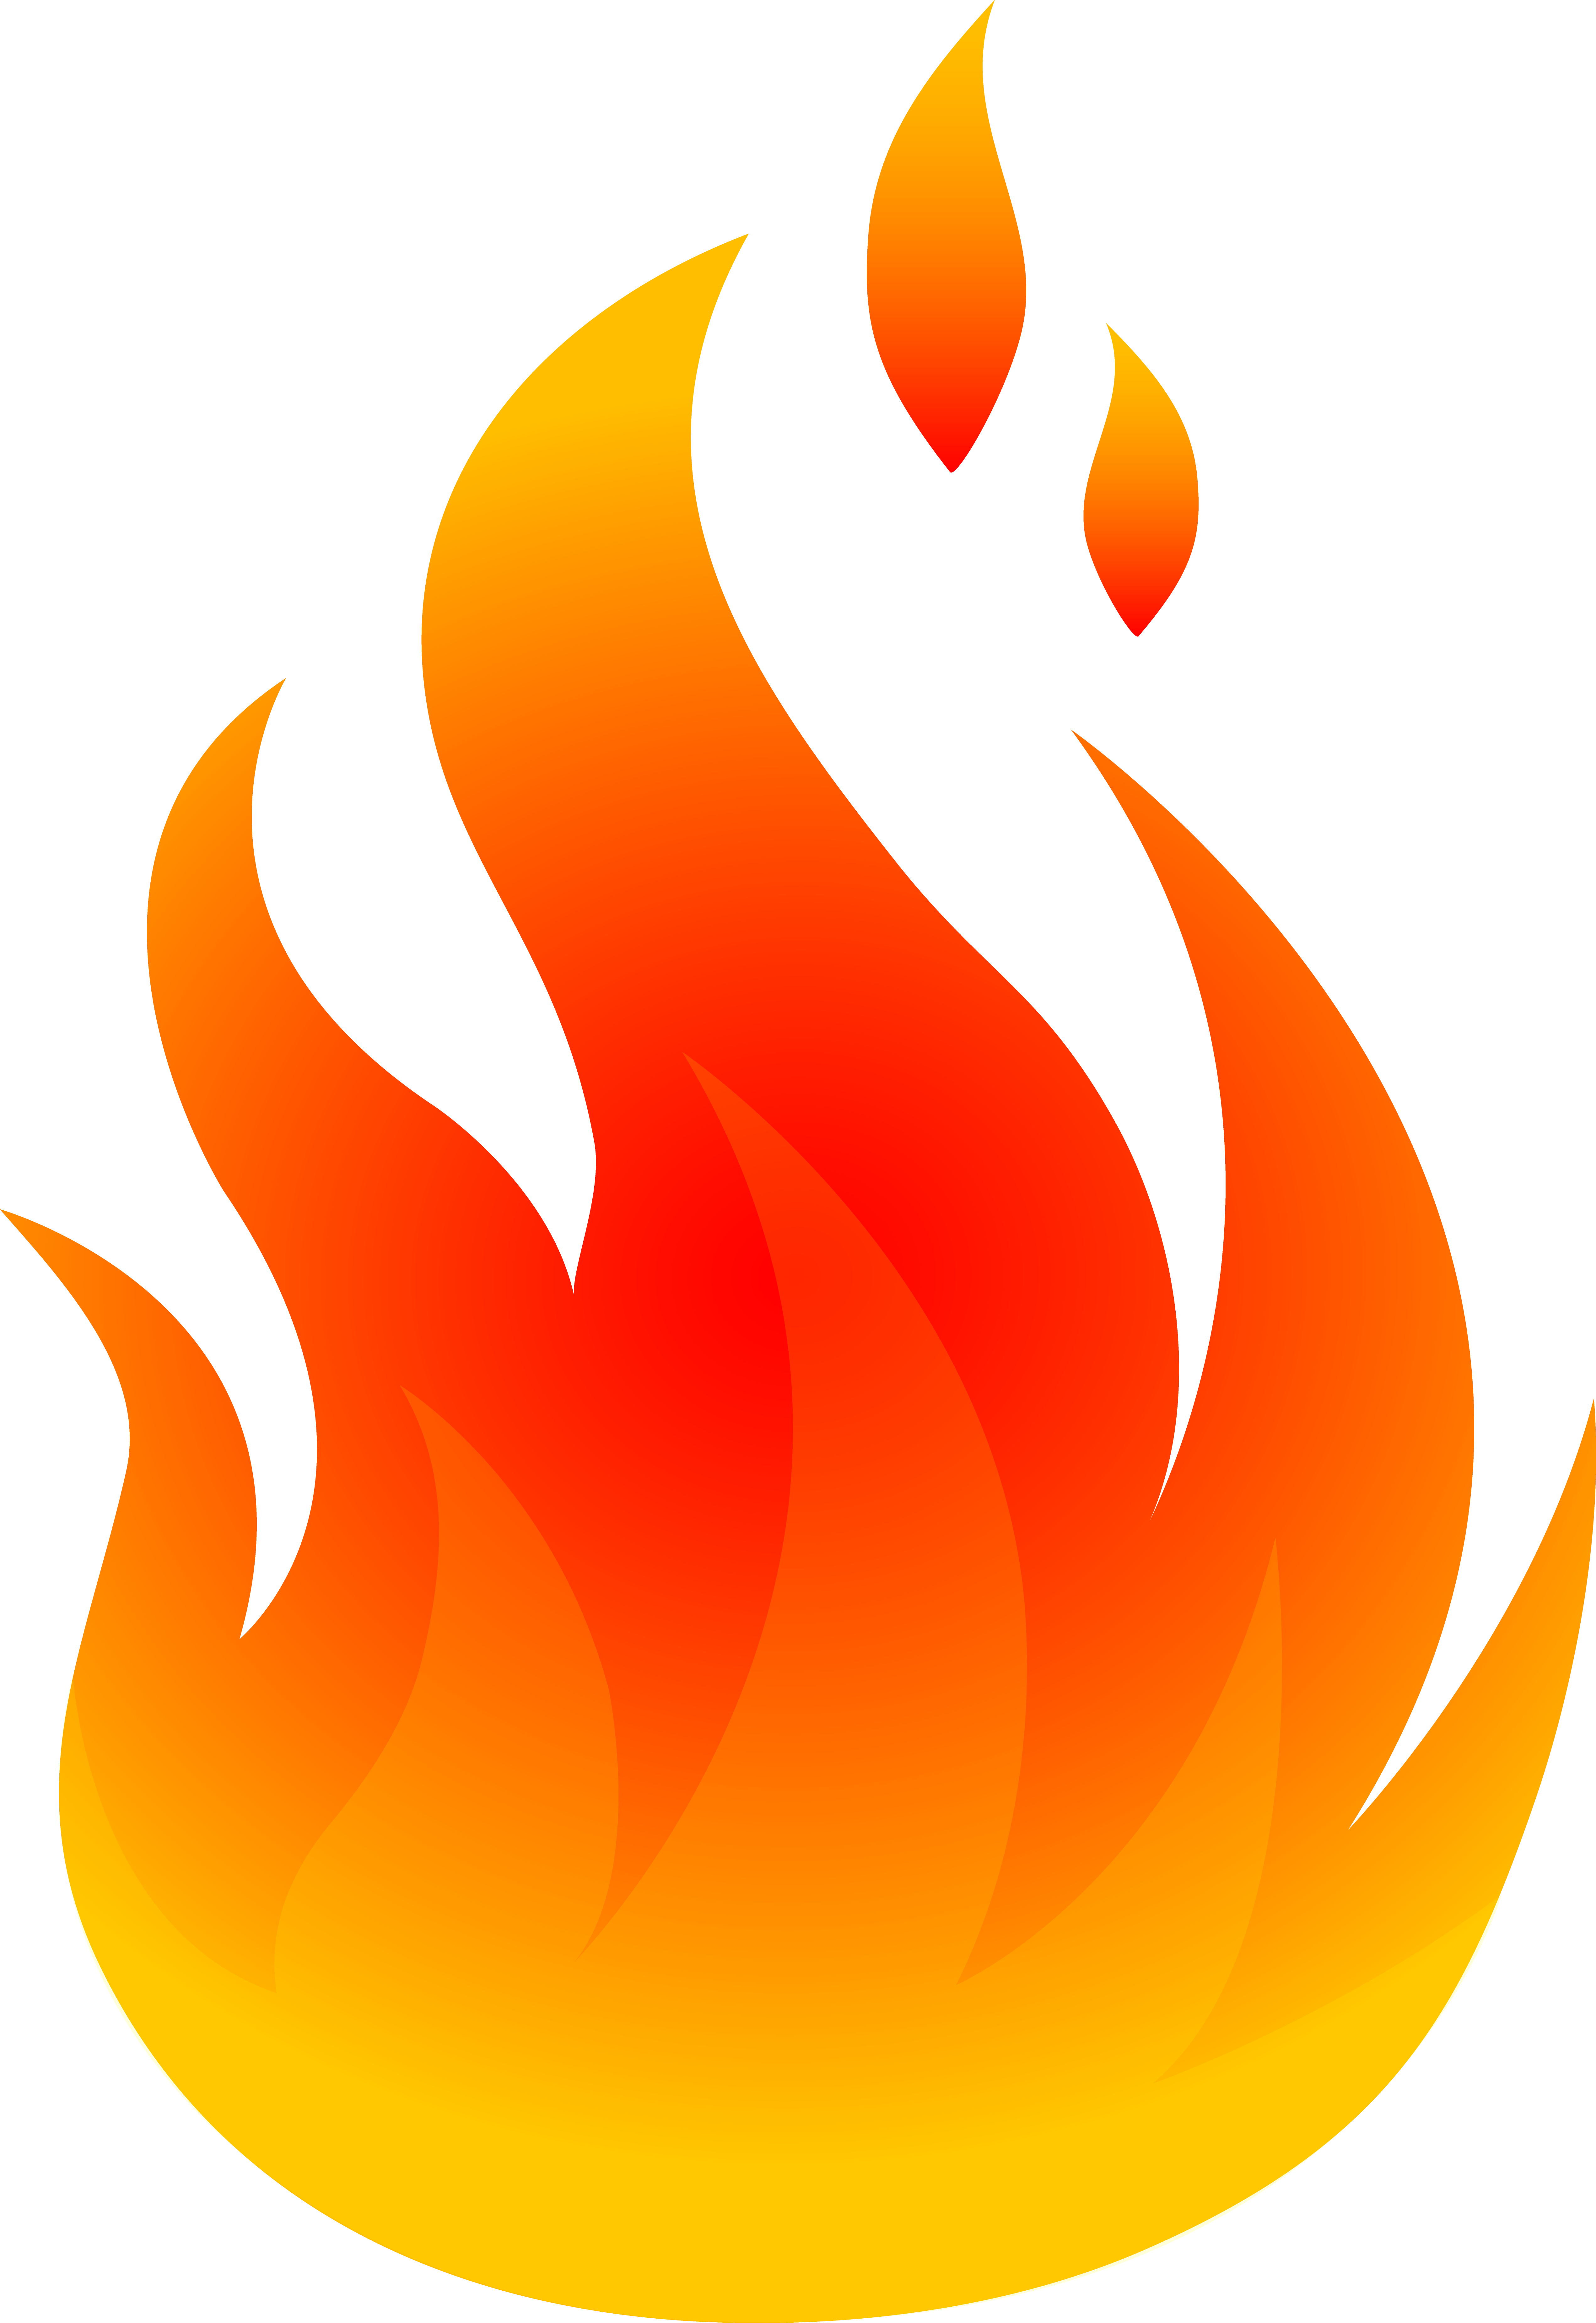 Fire flame clip art free vector for free download about free 4 ...